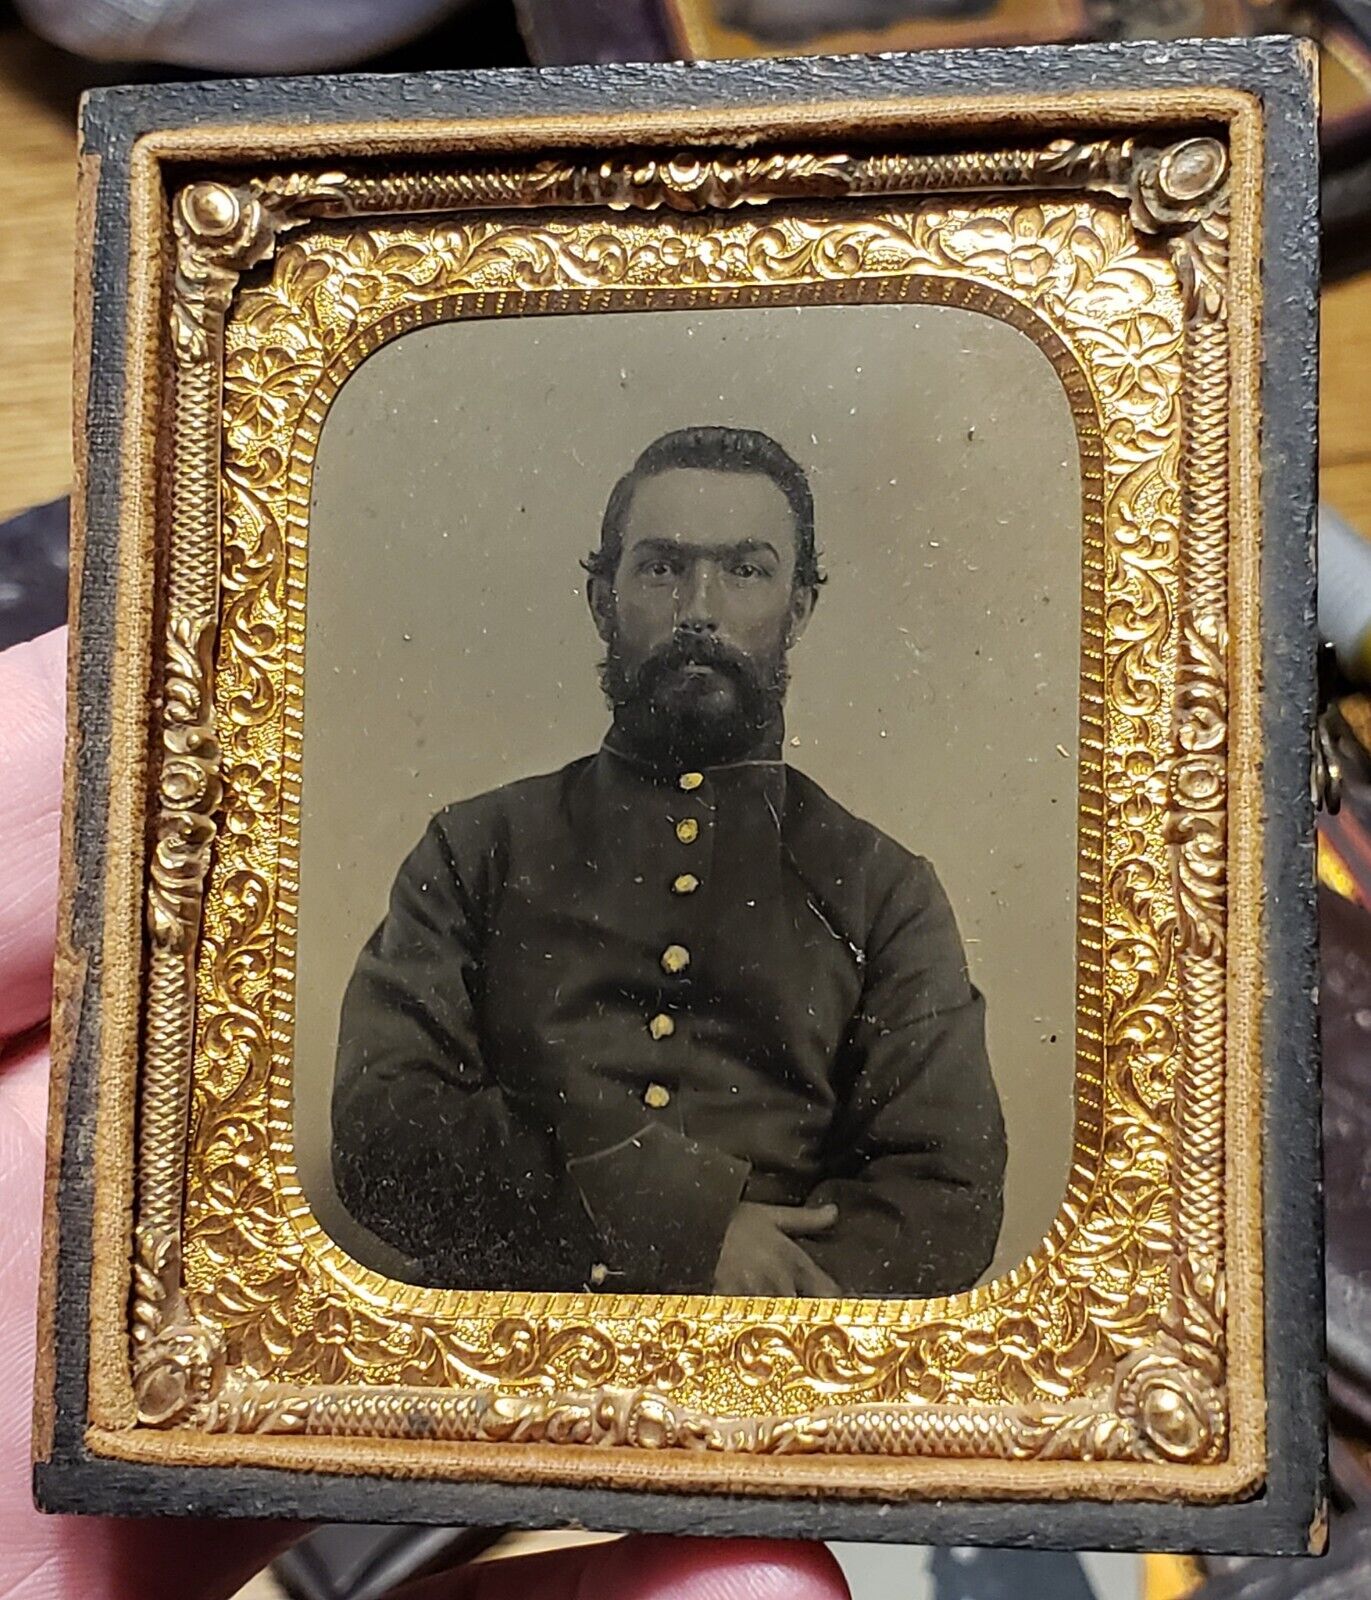 Sixth plate tintype of Union soldier Civil War photograph half case